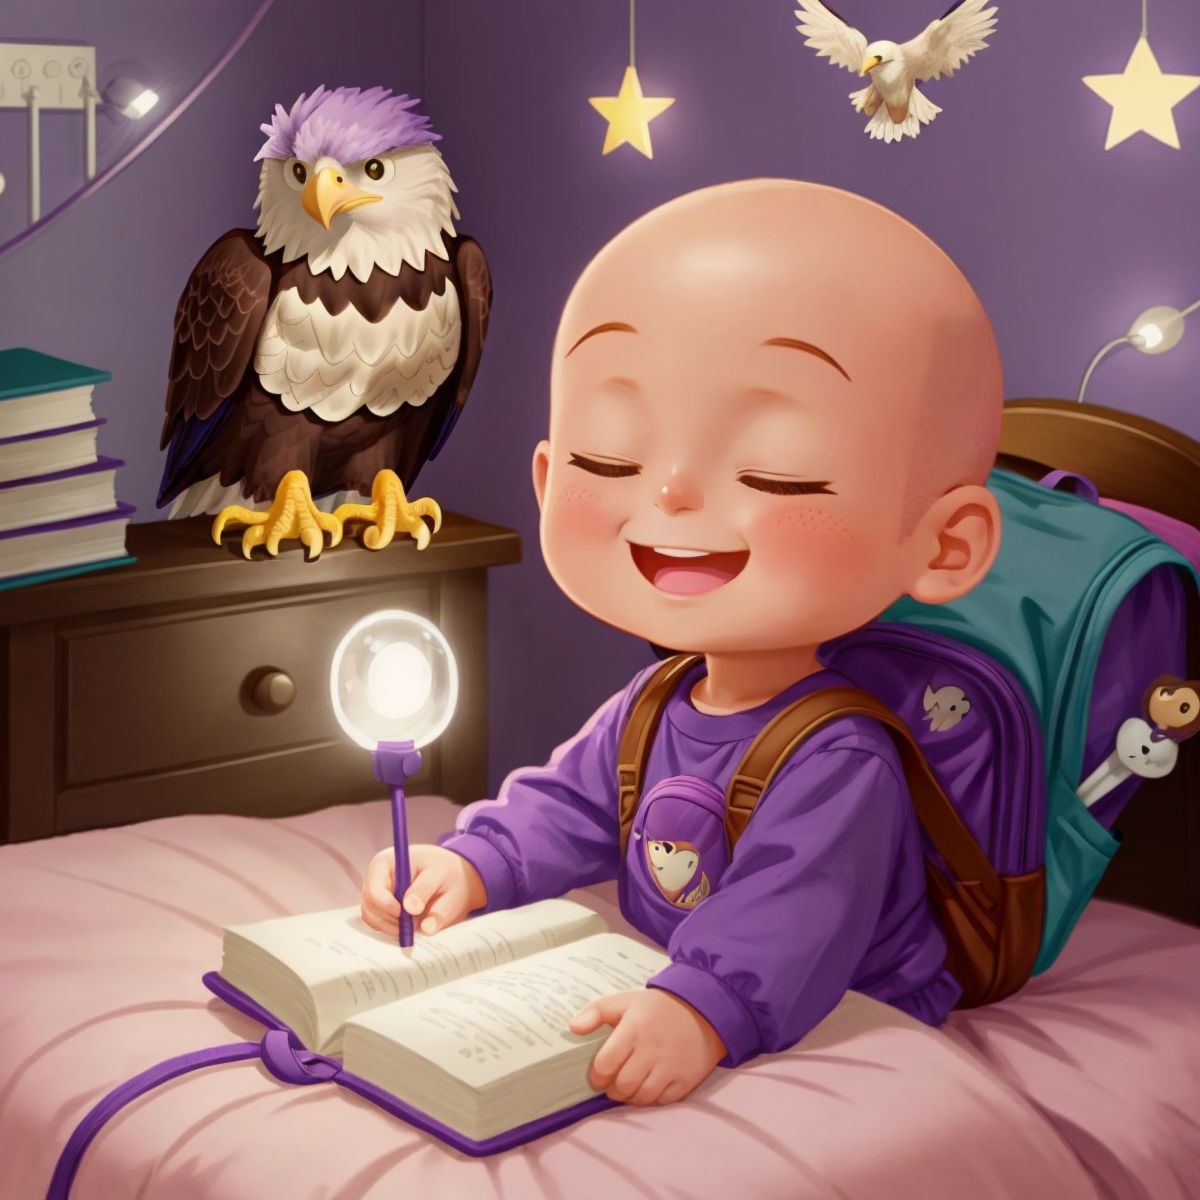 Little Eagle in bed, with a nightlight casting a soft glow, and school-themed wallpaper, smiling with eyes closed.